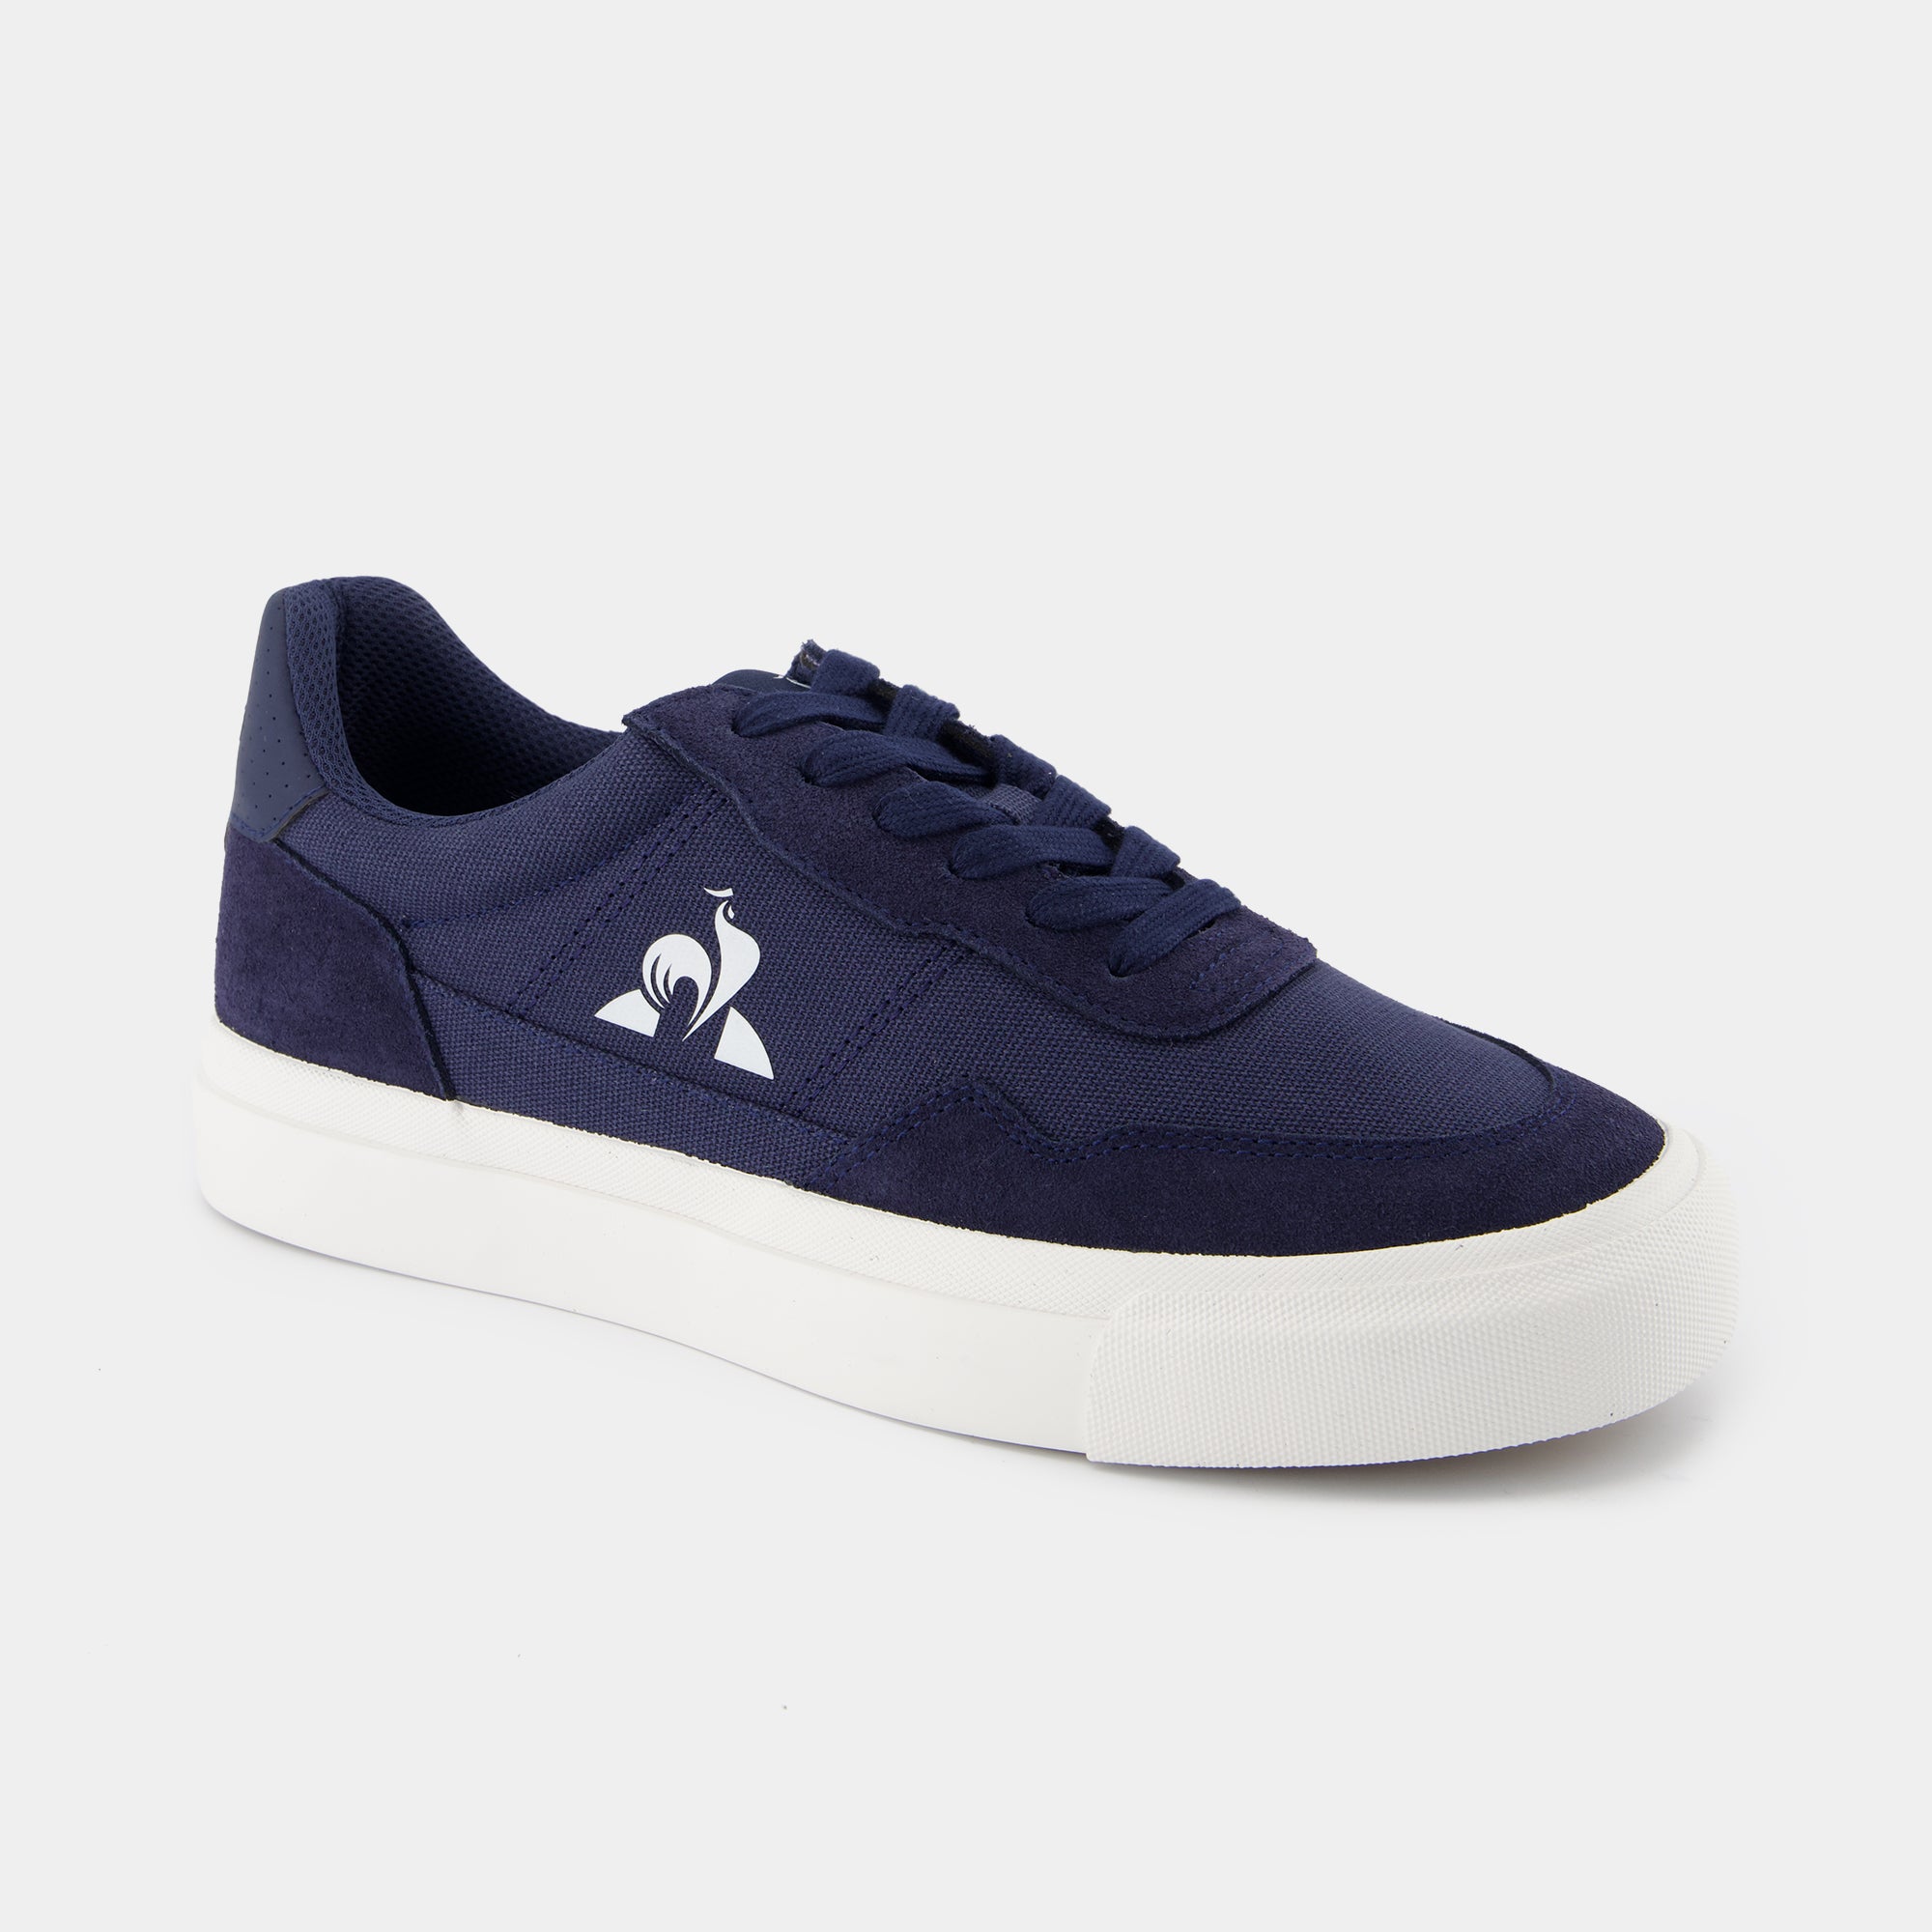 2422896-LCS OLLIE dress blue/optical white | Chaussures LCS OLLIE Homme